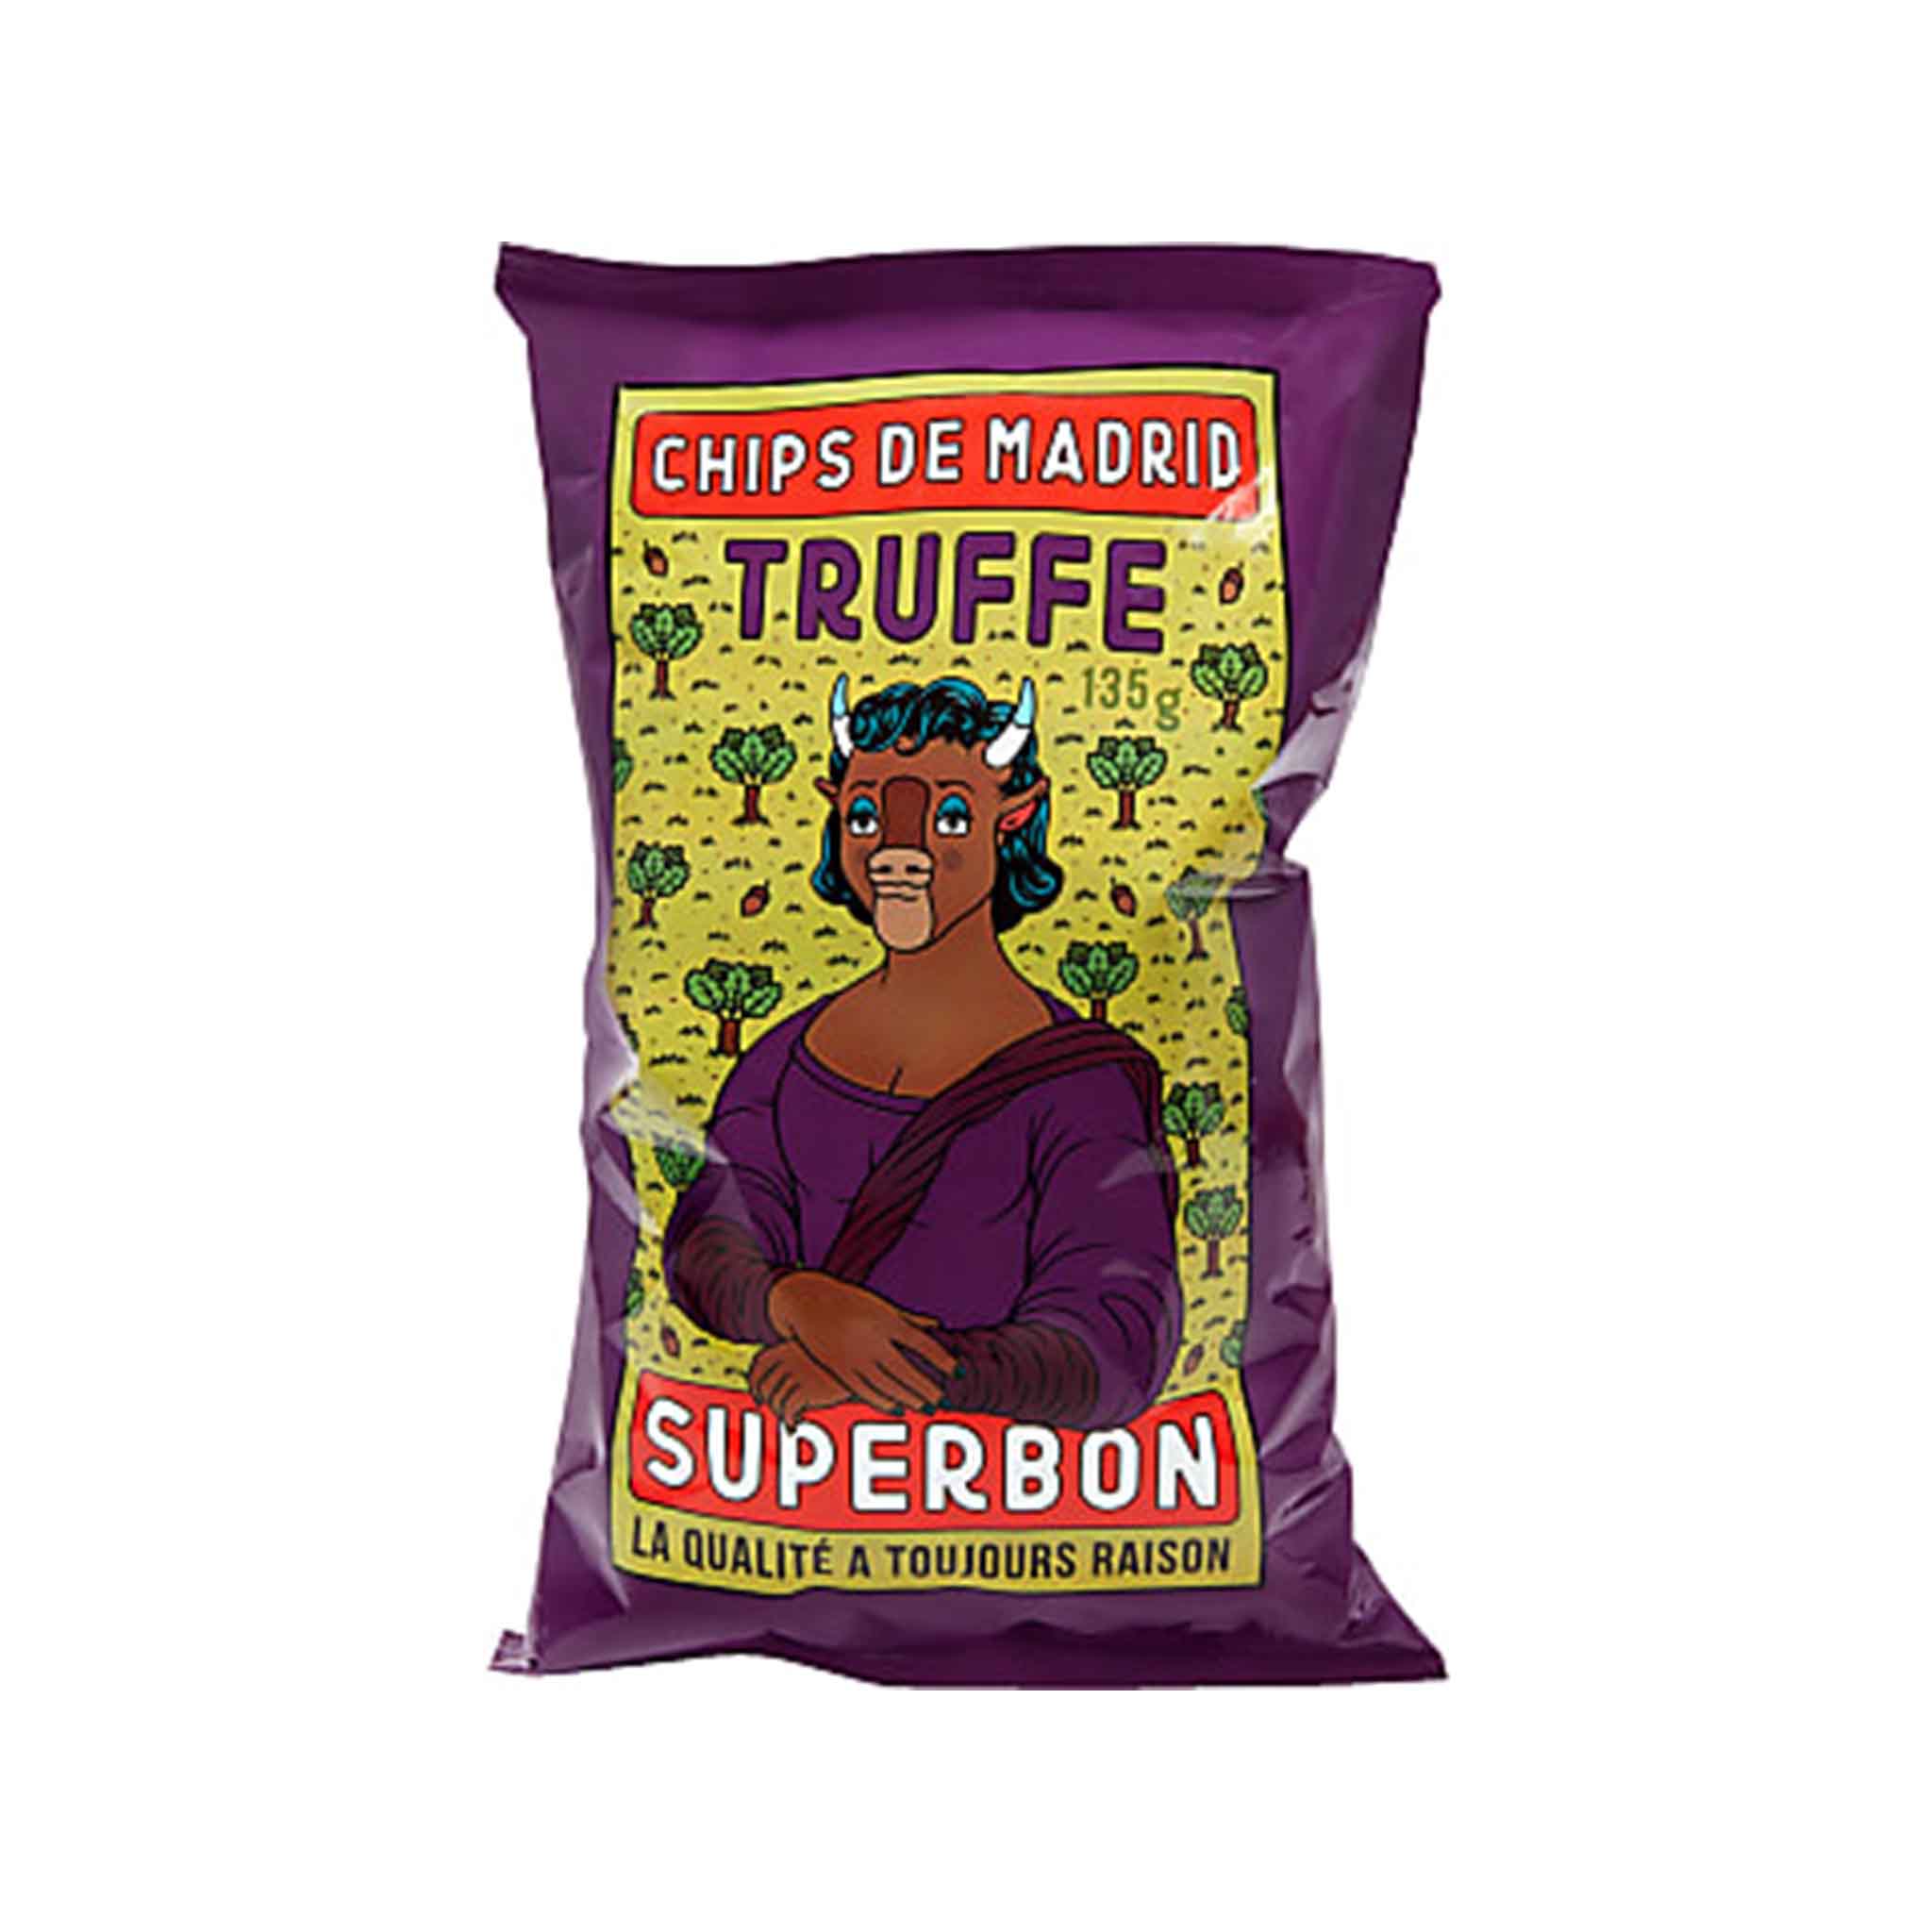 SUPERBON POTATO CHIPS WITH TRUFFLE 135g